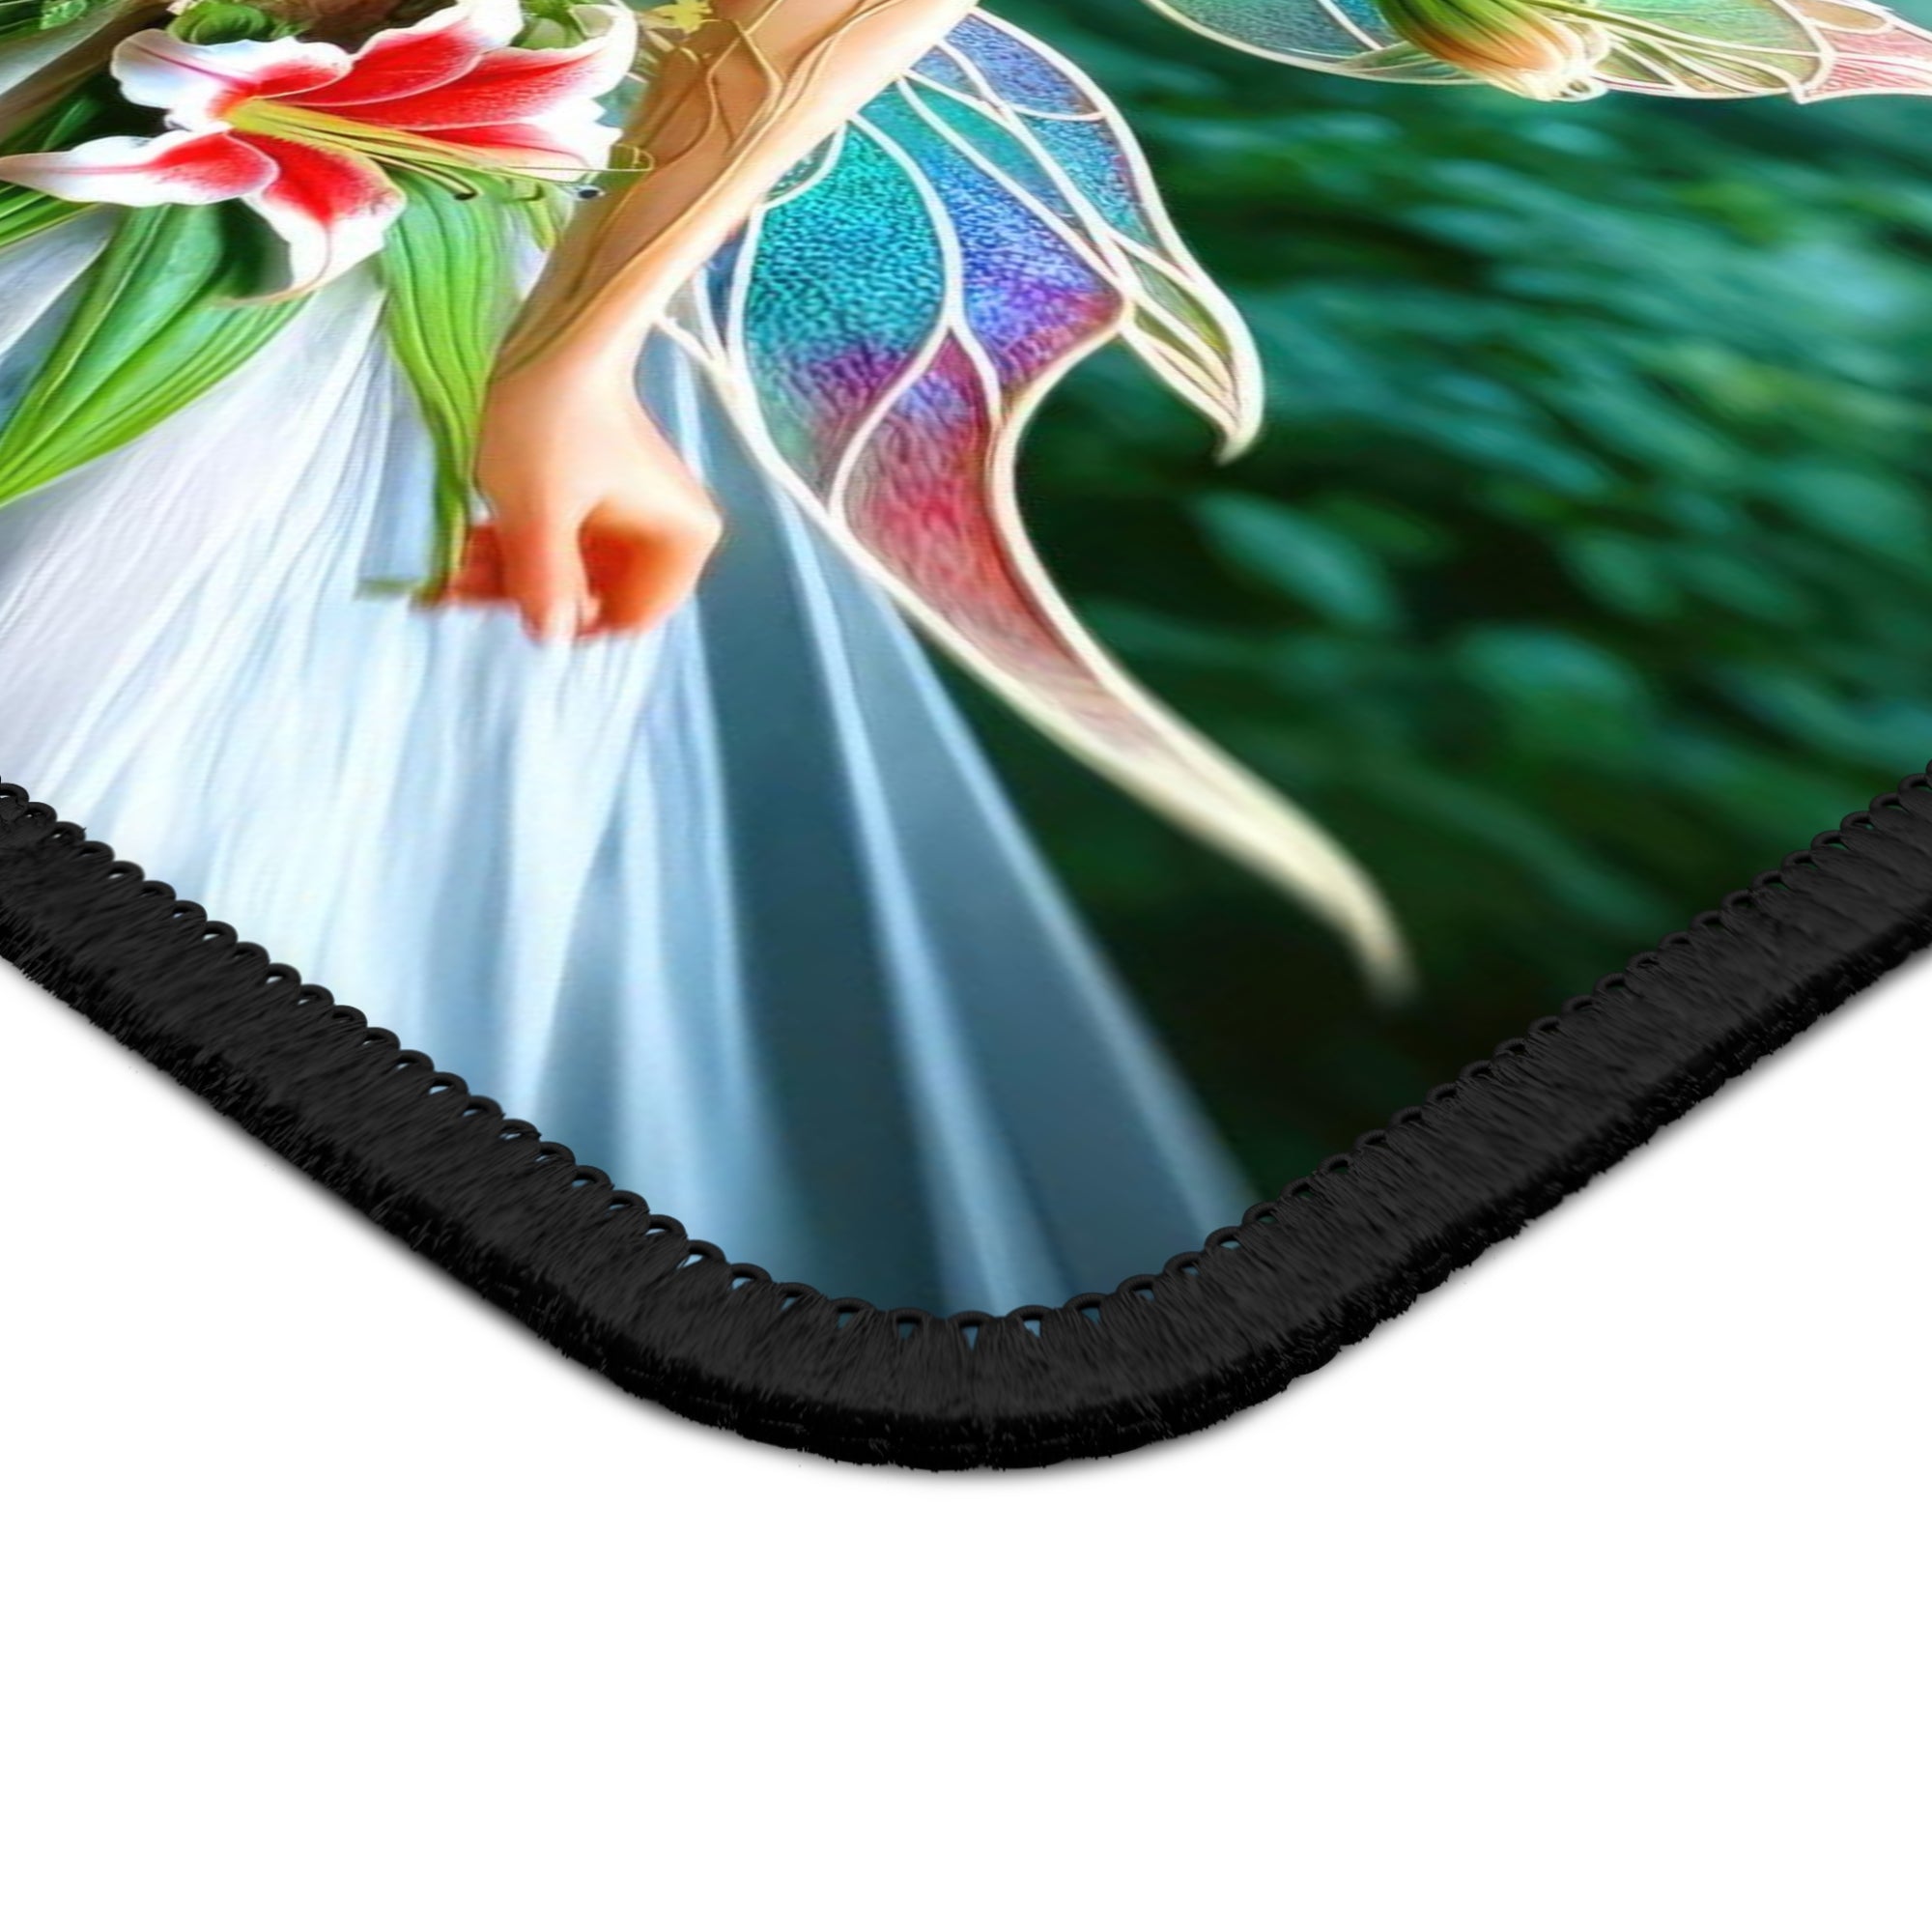 The Stargazer Fairy's Midsummer Night Dream Gaming Mouse Pad